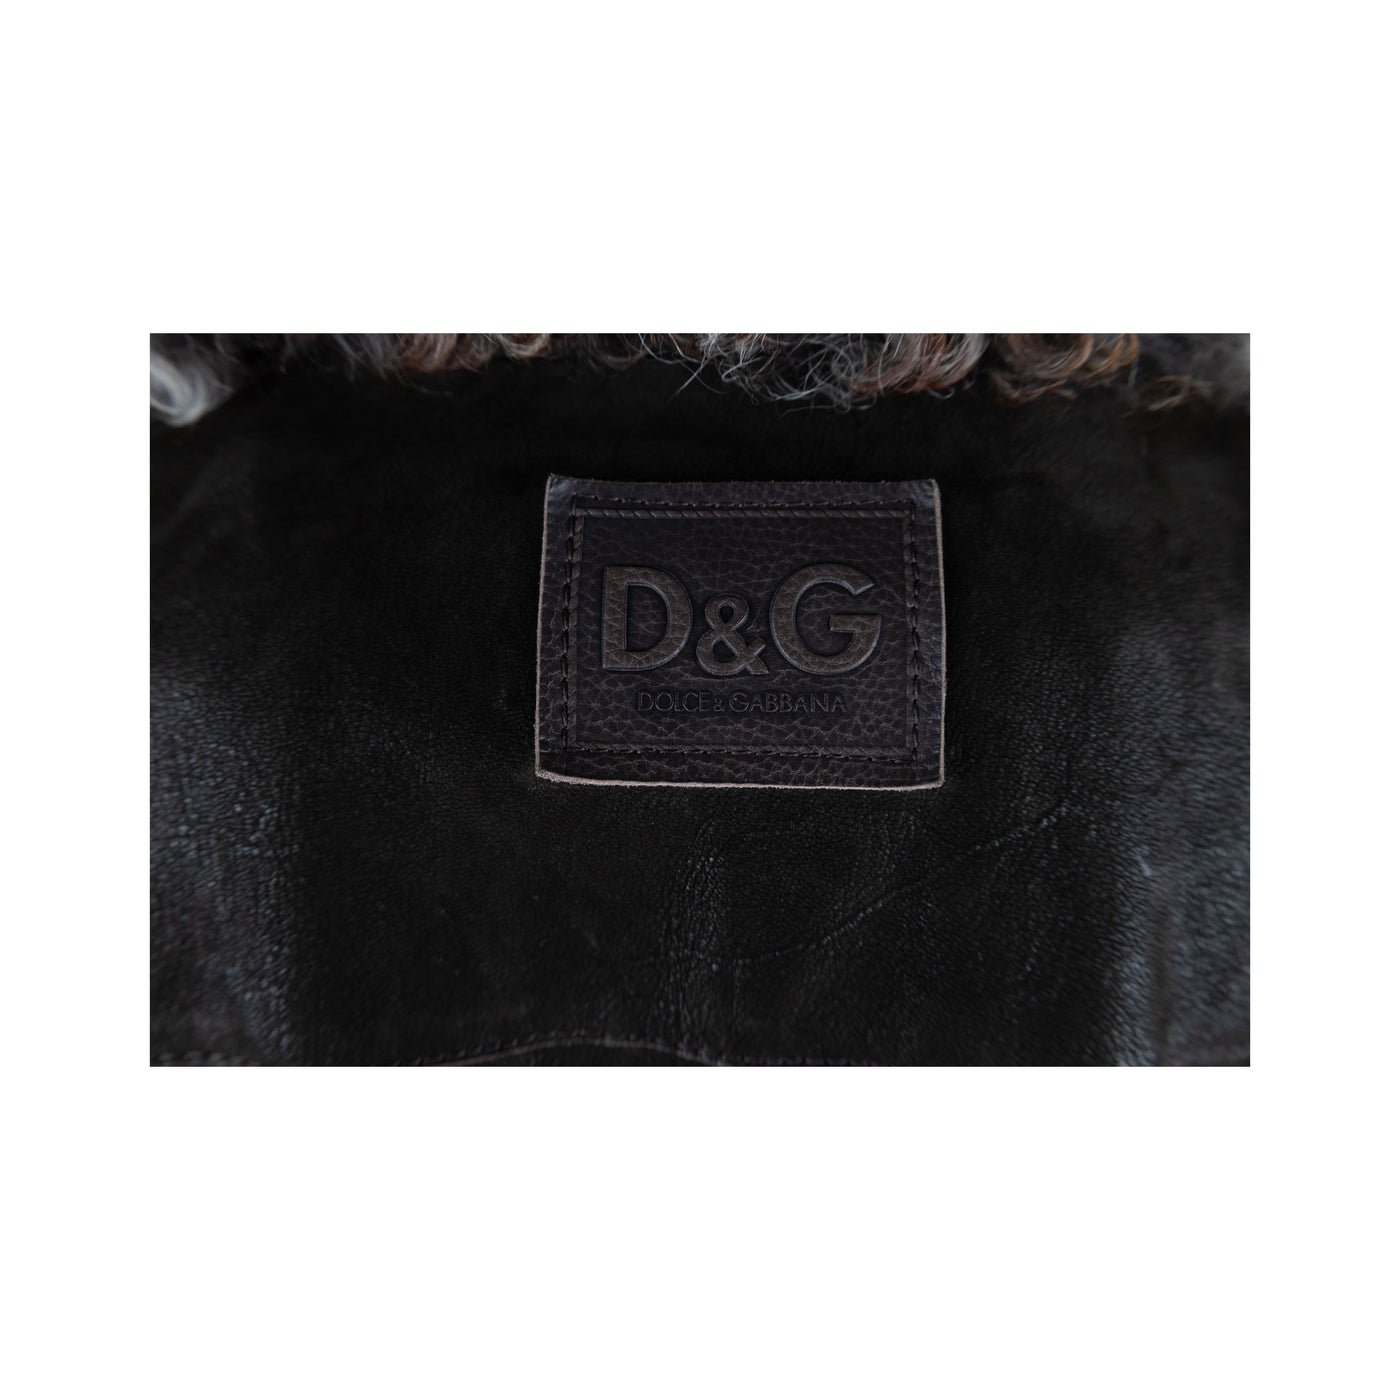 Secondhand Dolce & Gabbana Long Leather Jacket with Fur